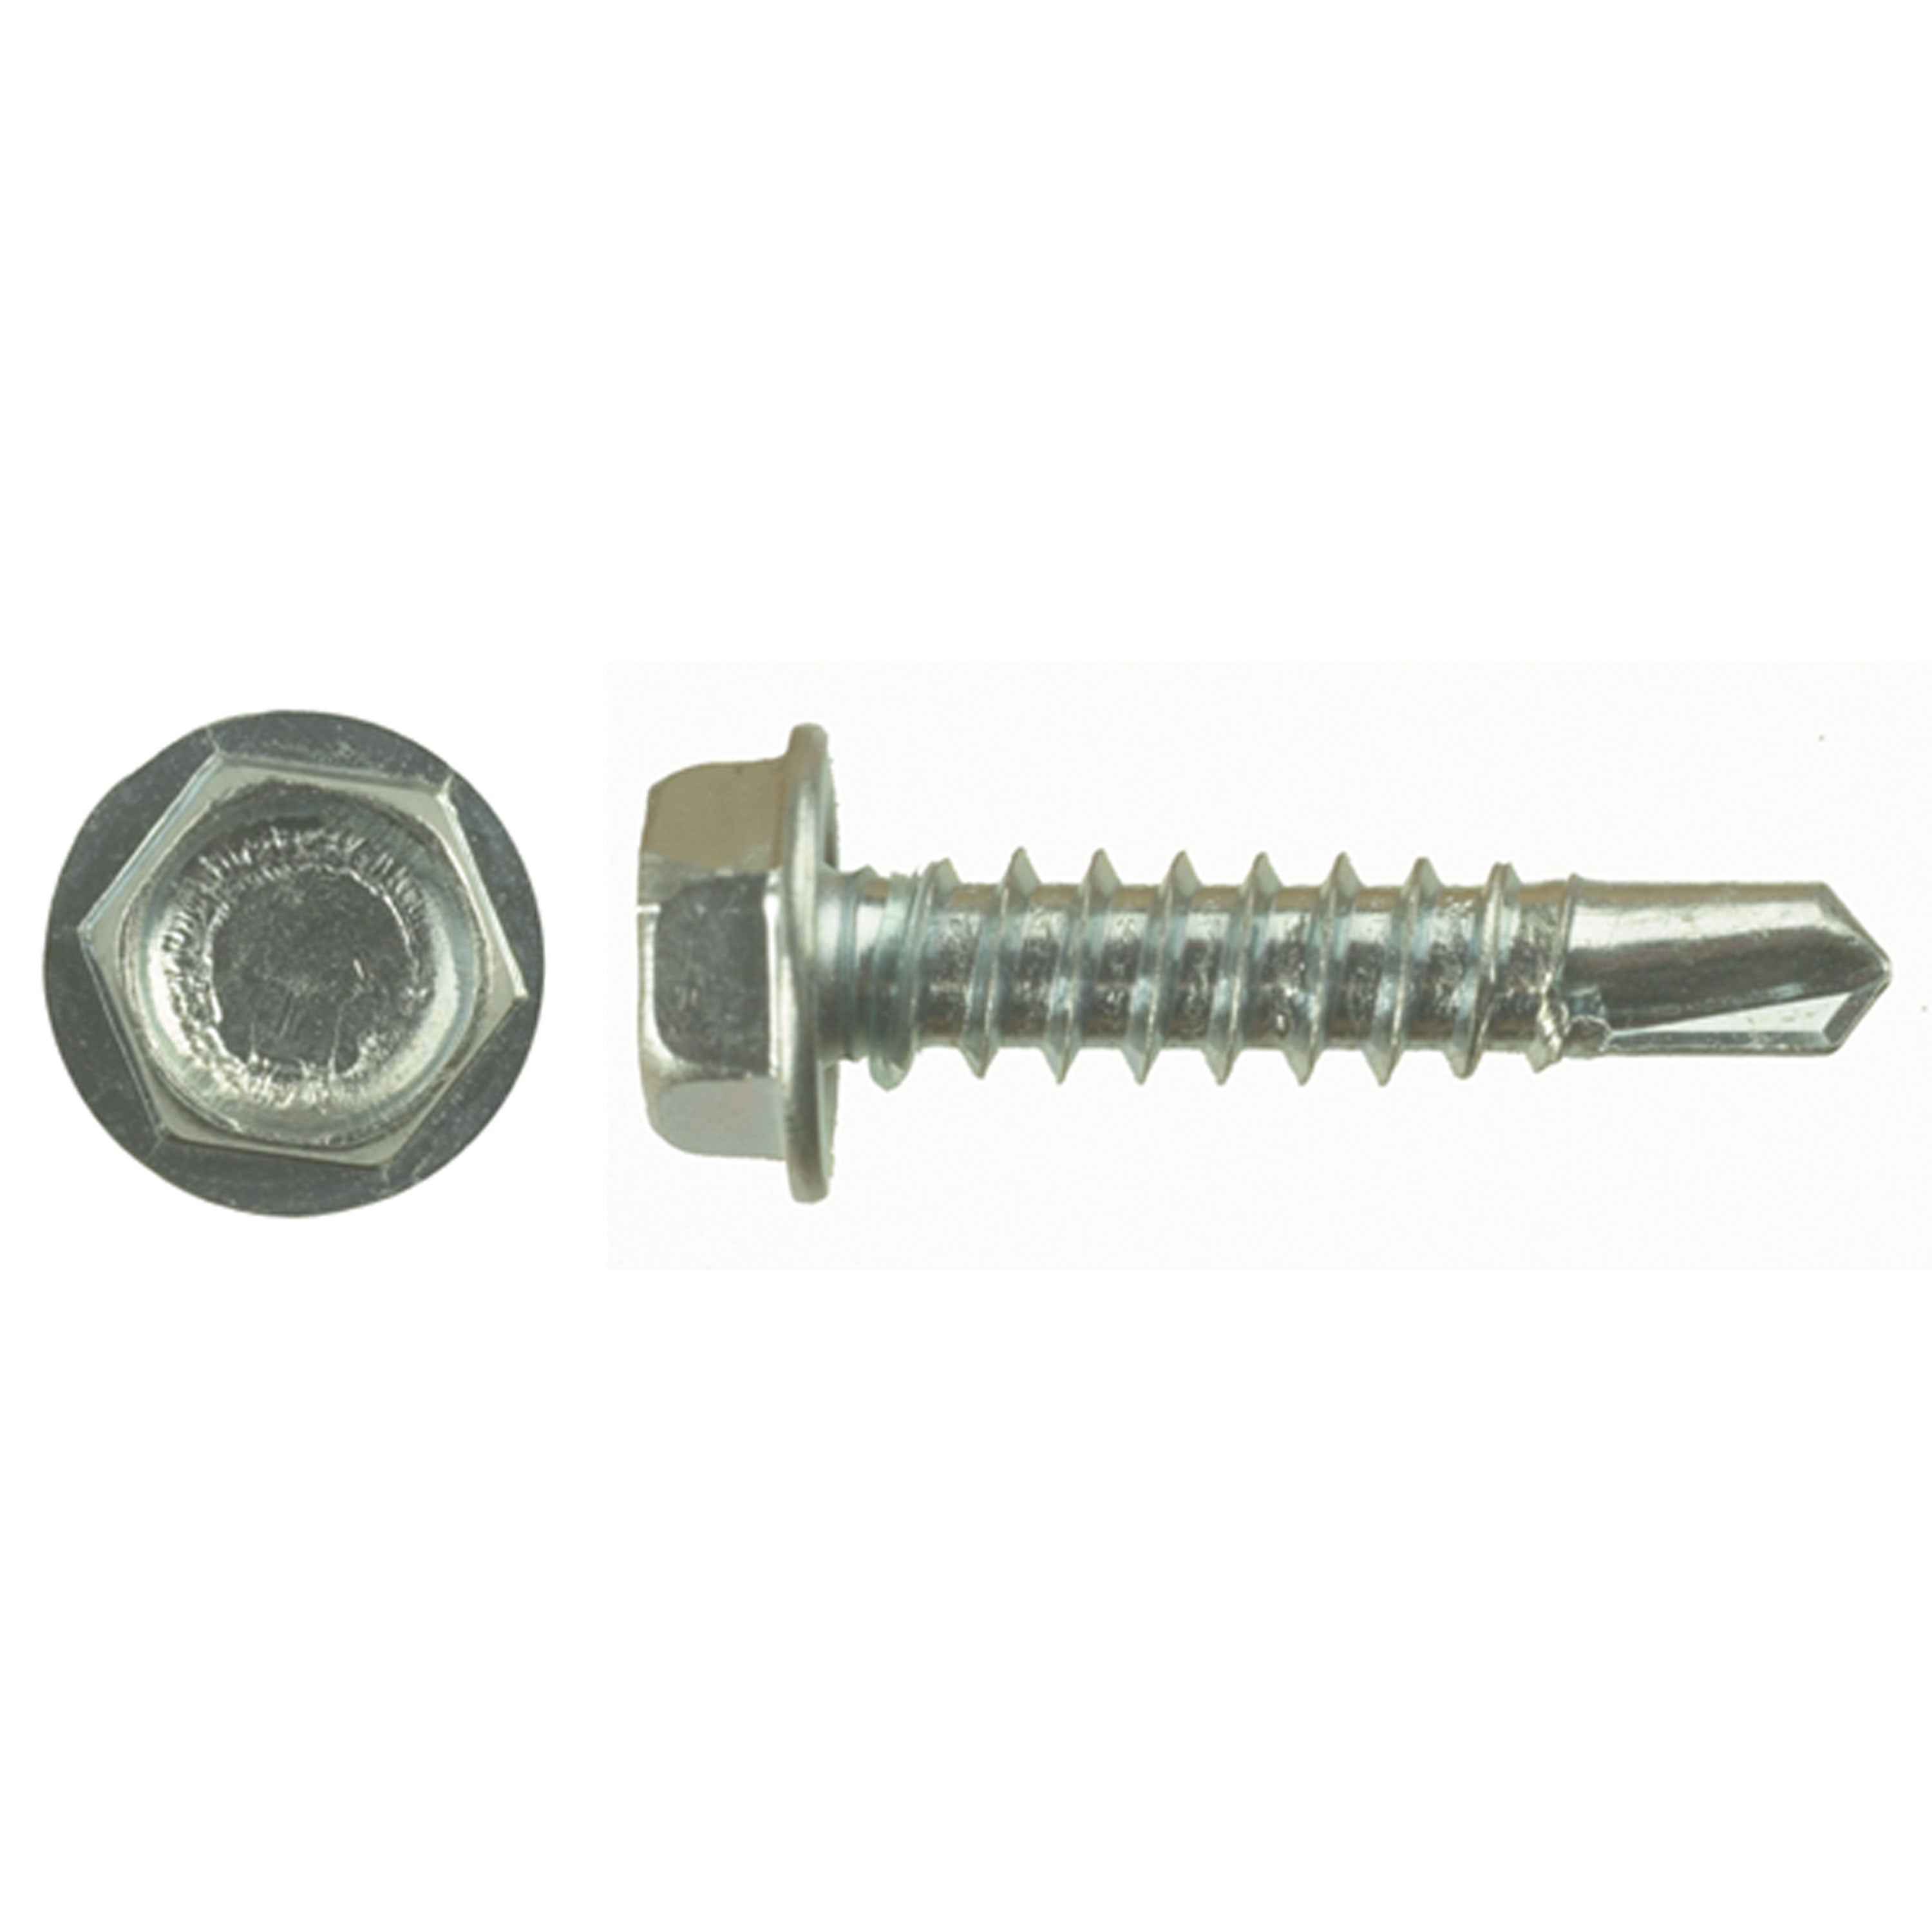 AP Products 012-DP100 8 X 1-1/2 Self-Tapping 1/4" Hex Head Screw, Pack of 100 - 1-1/2"